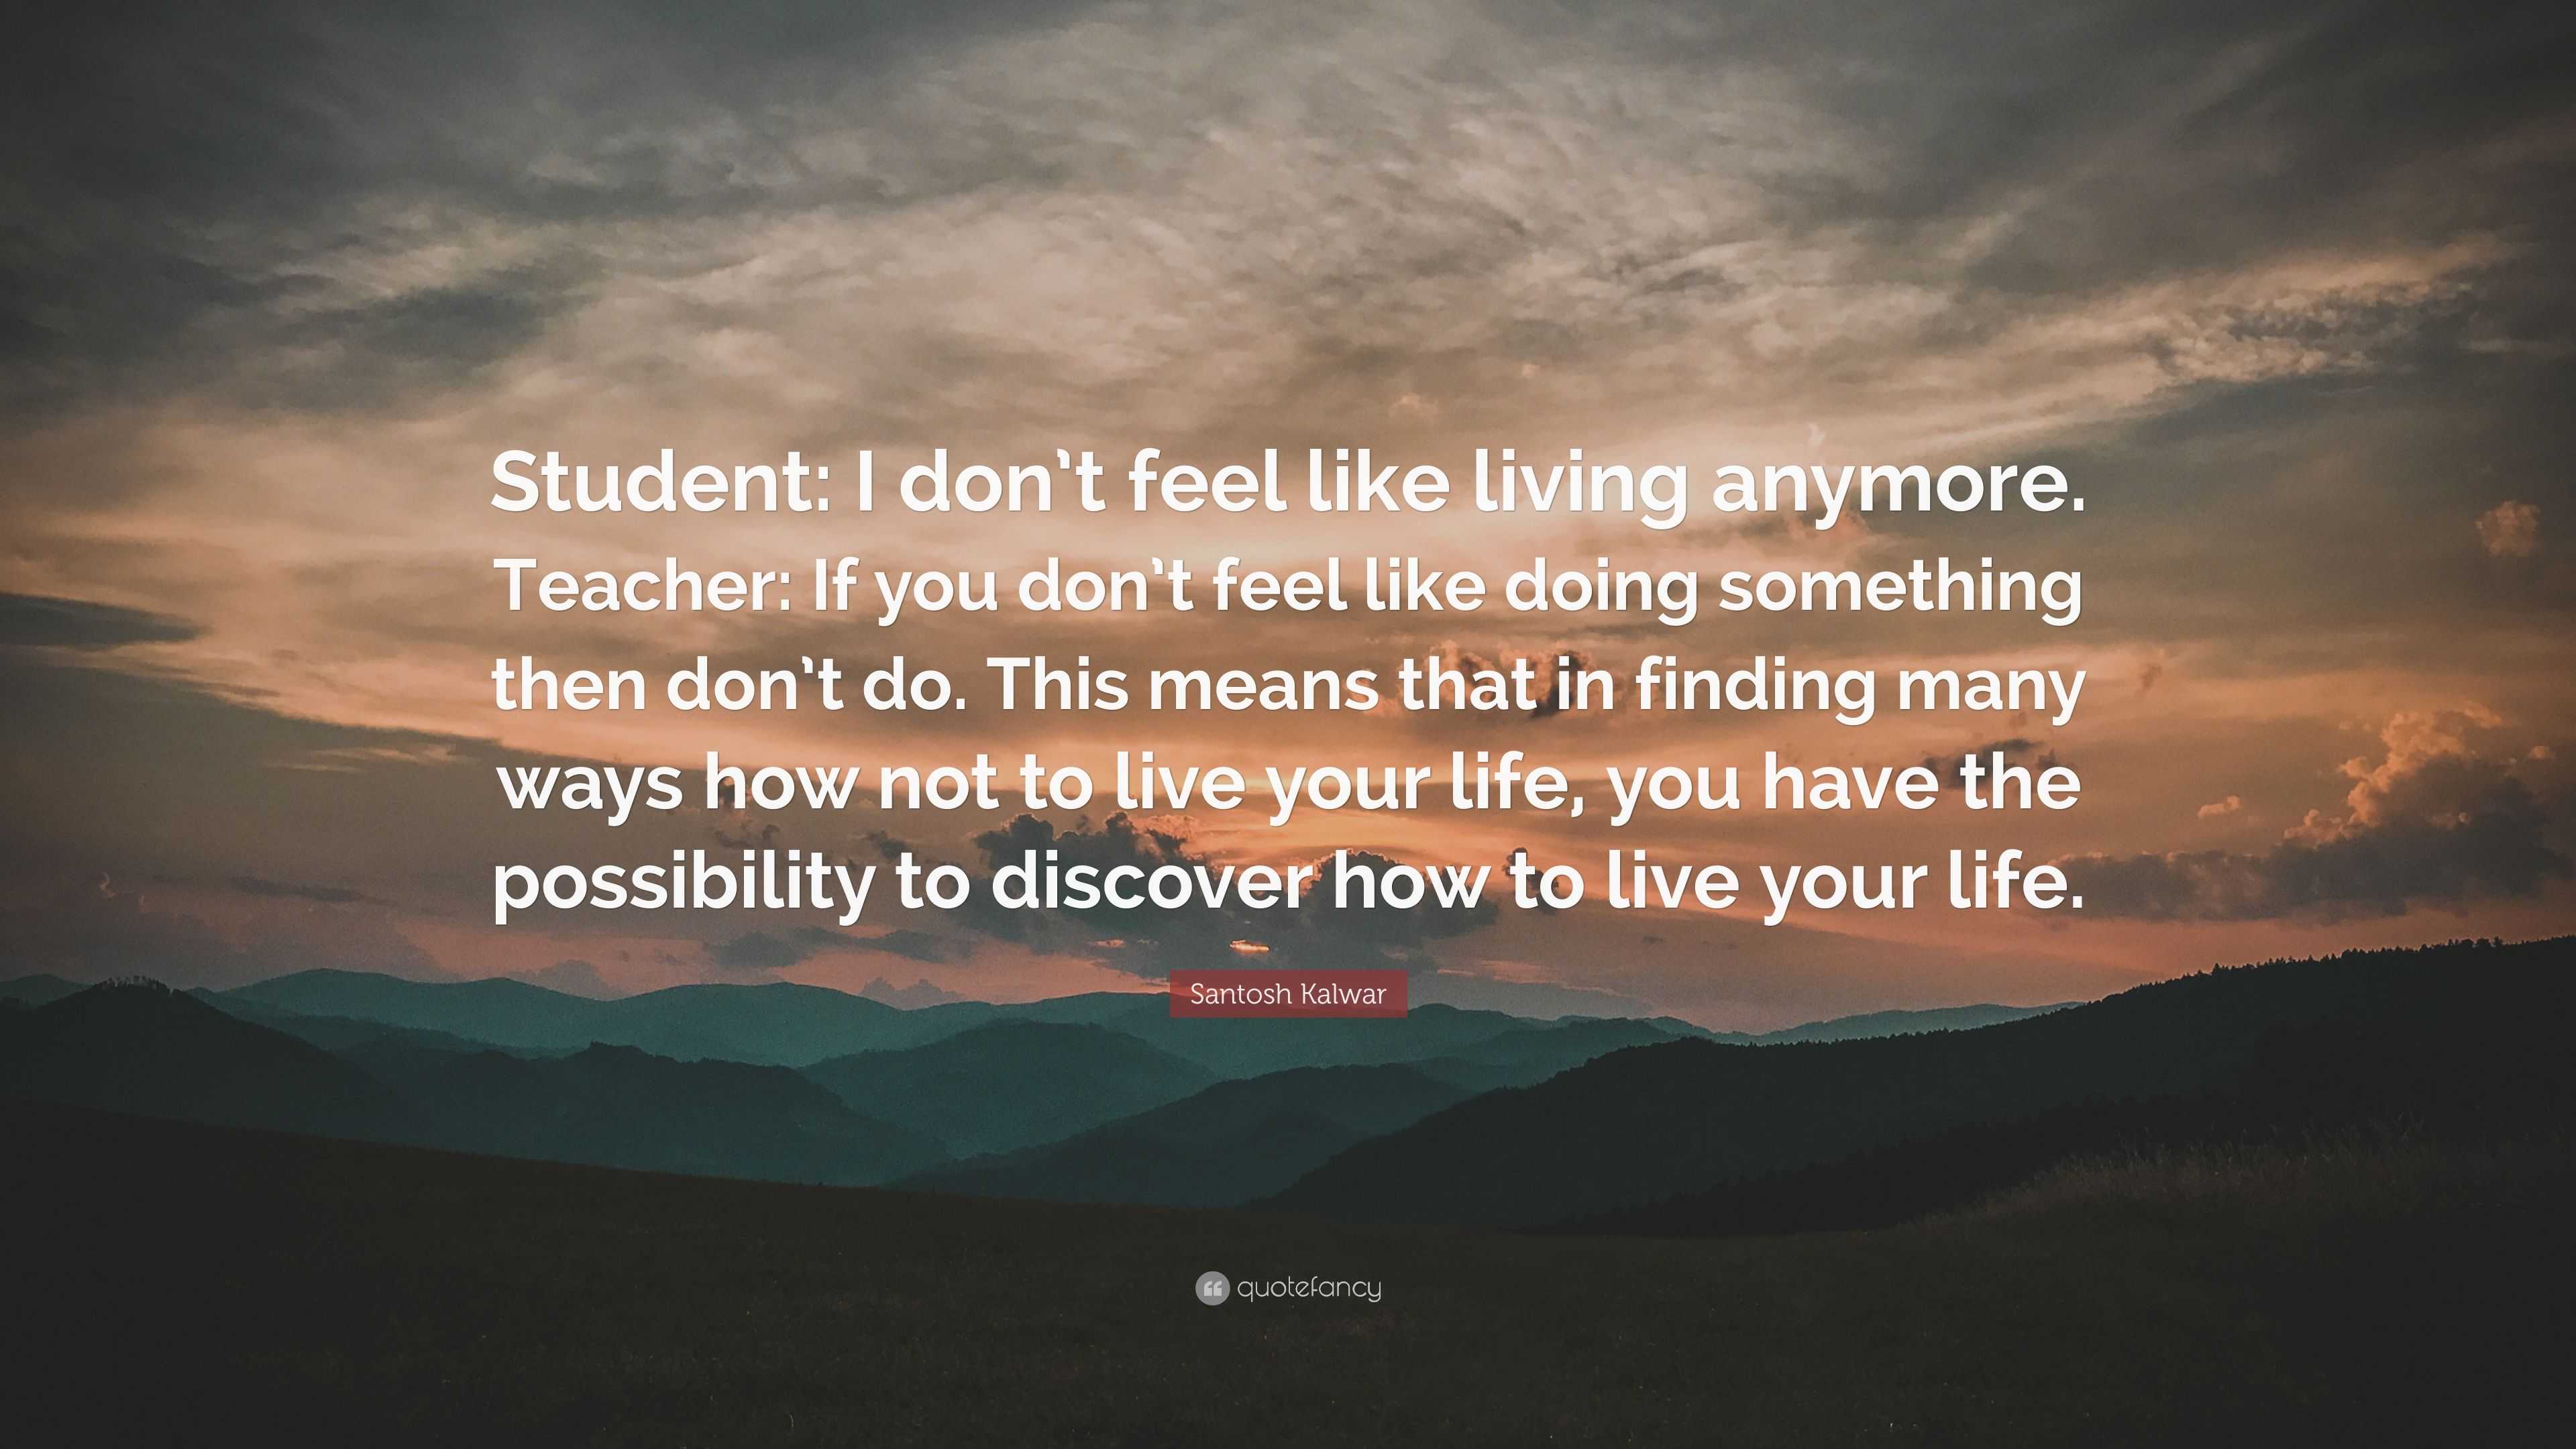 Santosh Kalwar Quote: “Student: I Don't Feel Like Living Anymore. Teacher: If You Don't Feel Like Doing Something Then Don't Do. This Means Tha...”